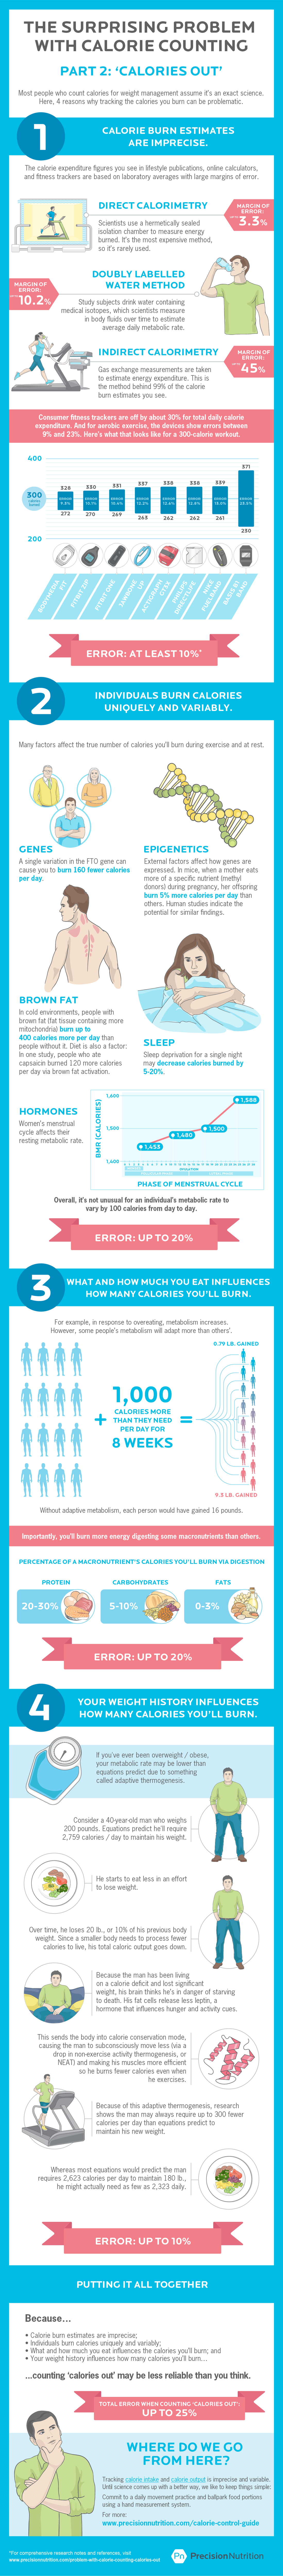 Why Calorie Counting Will Always Be Flawed [Infographic]